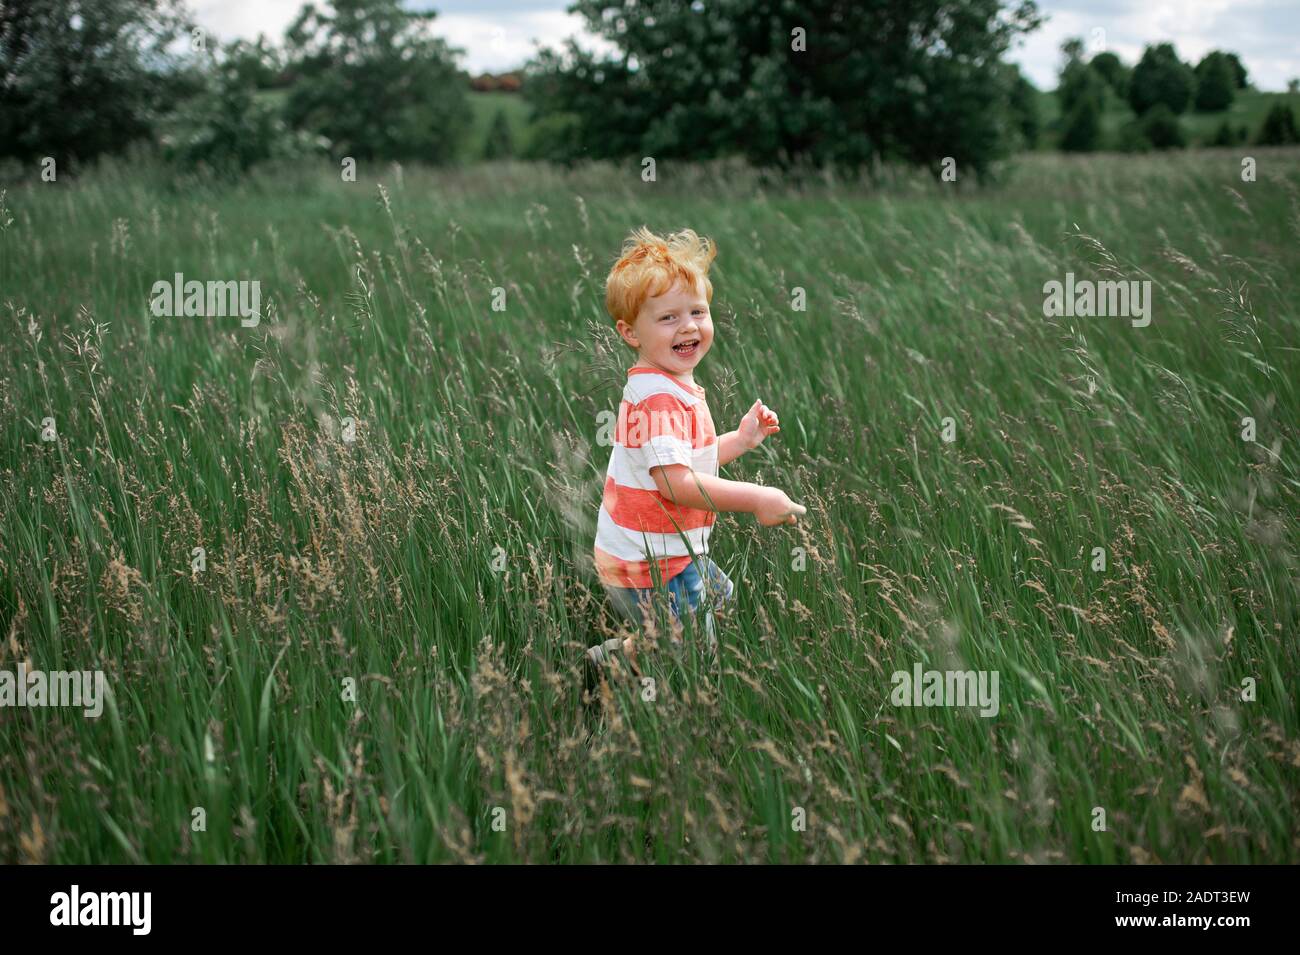 Toddler boy laughing while walking through a long grassy field outside Stock Photo